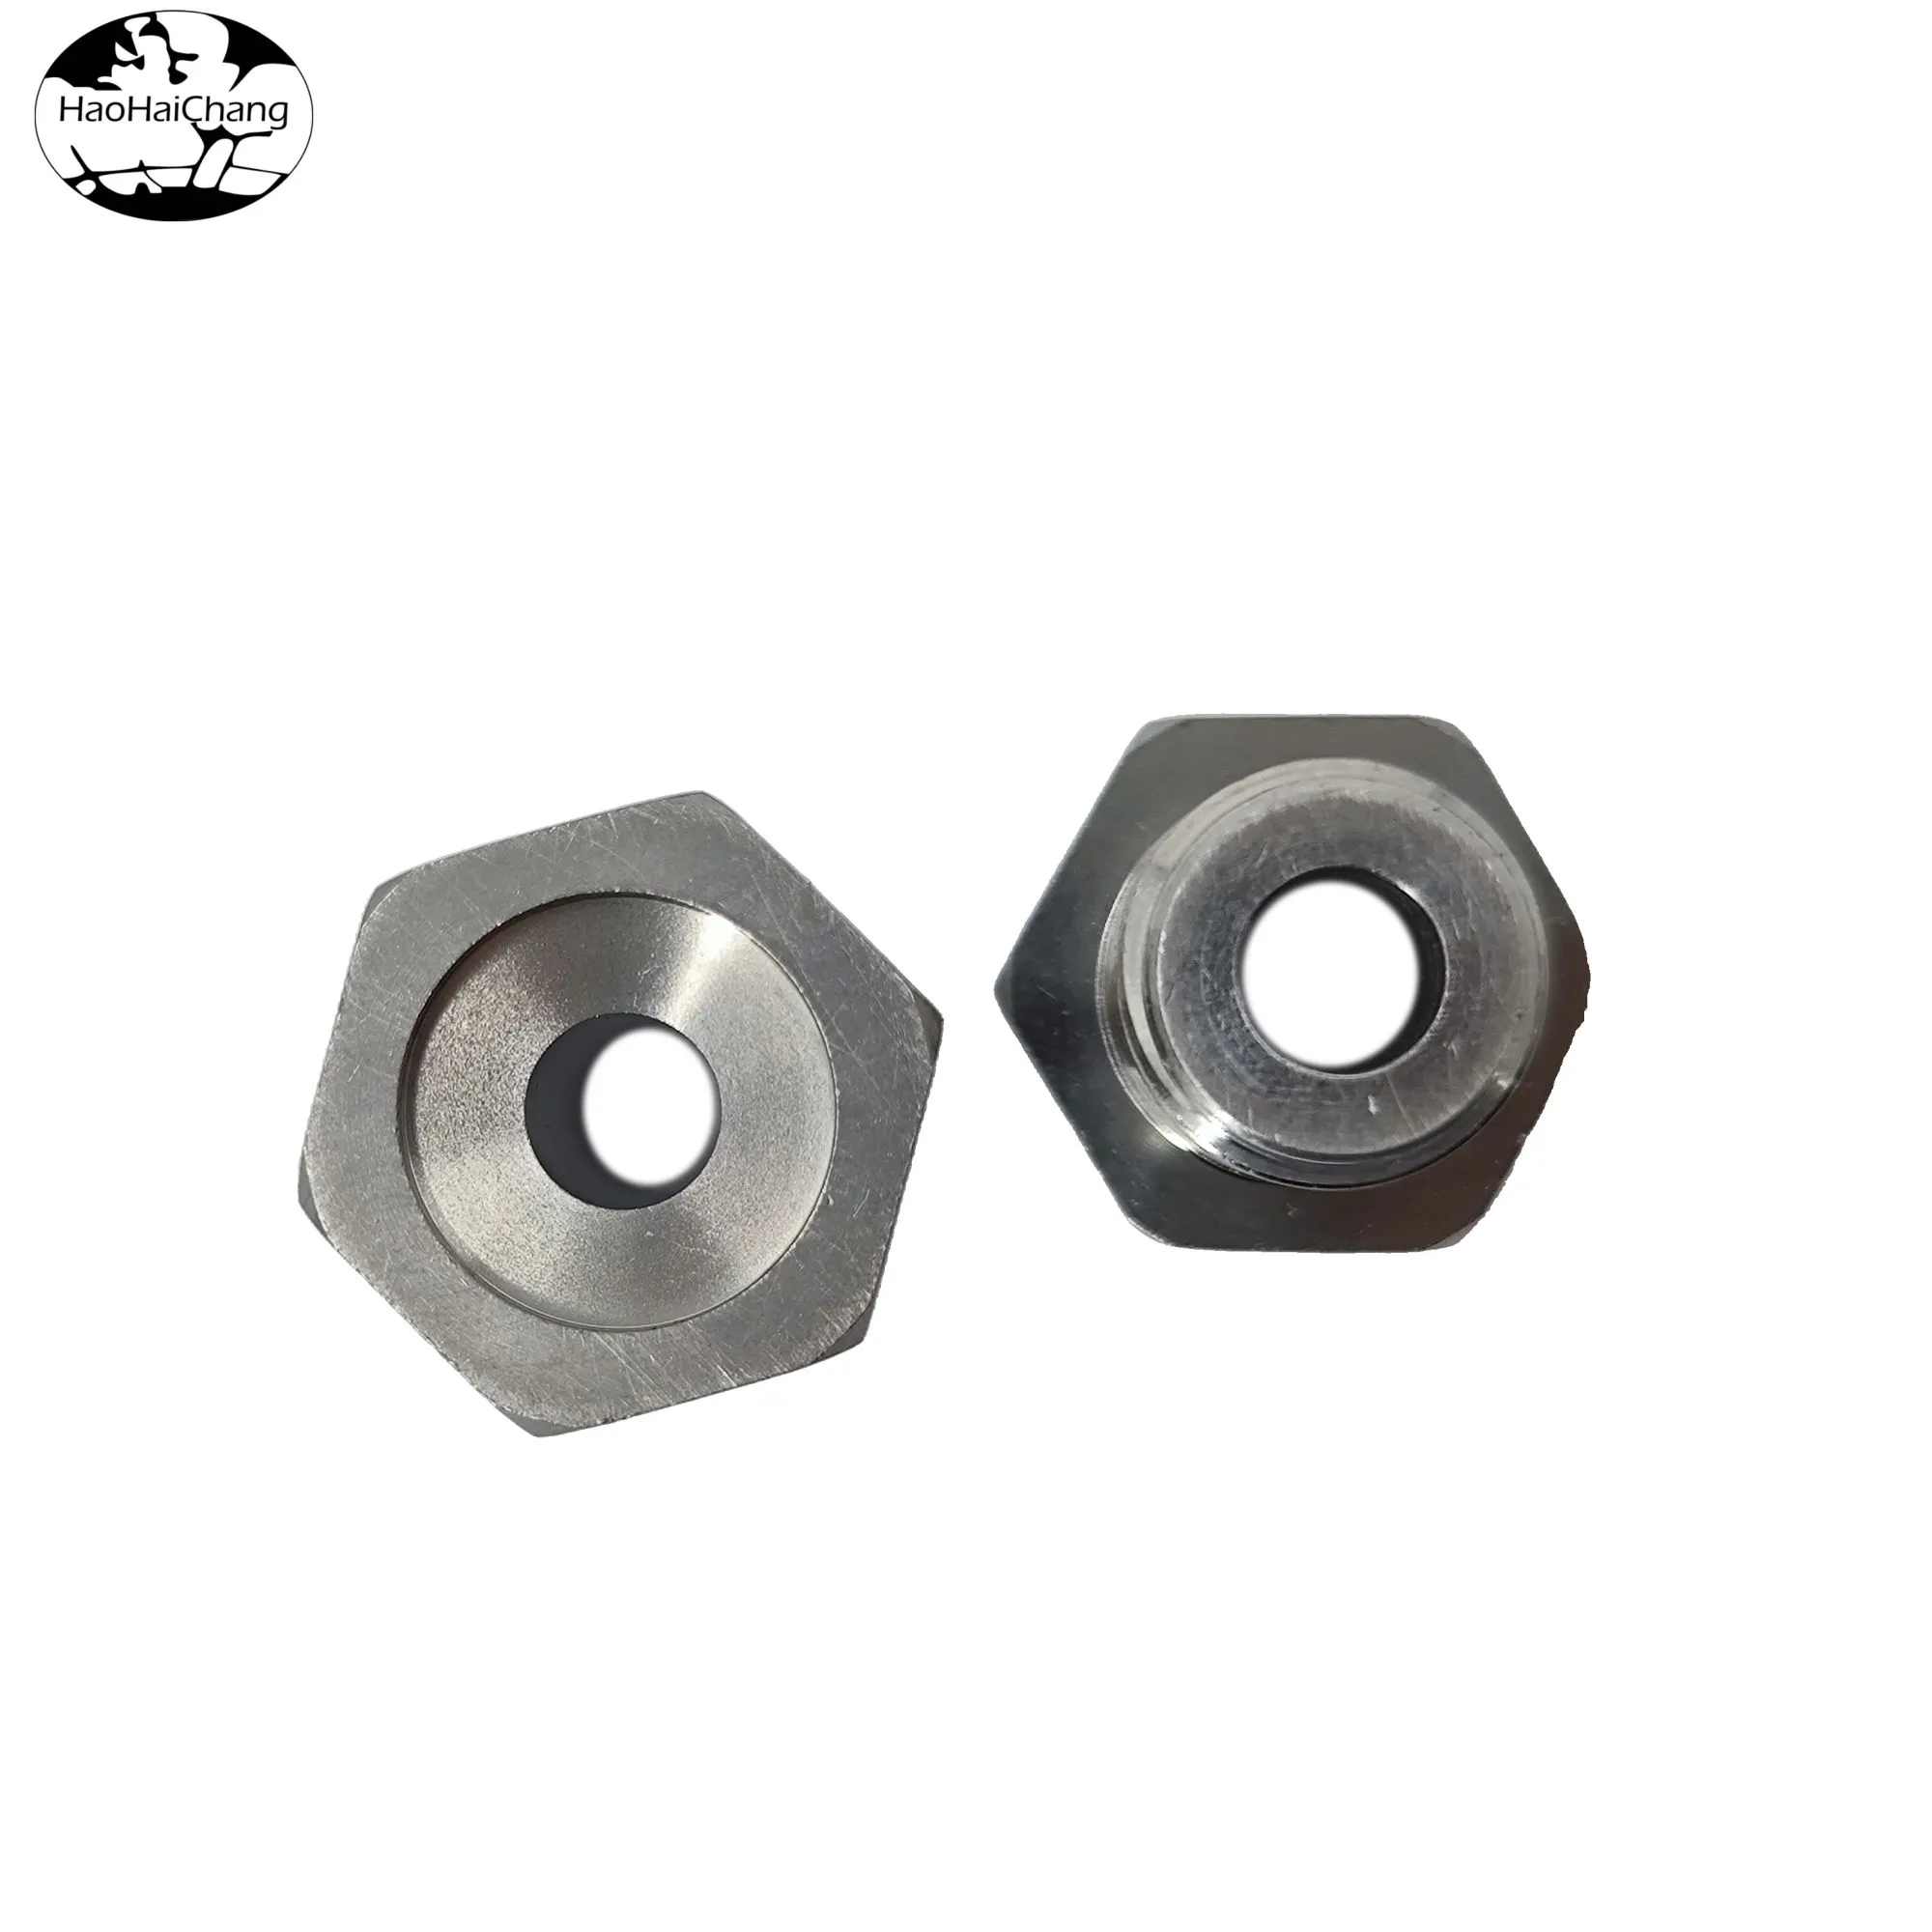 HHC-579 M14 Stainless Steel T-Shaped Hexagon Head Hollow Screw Stud